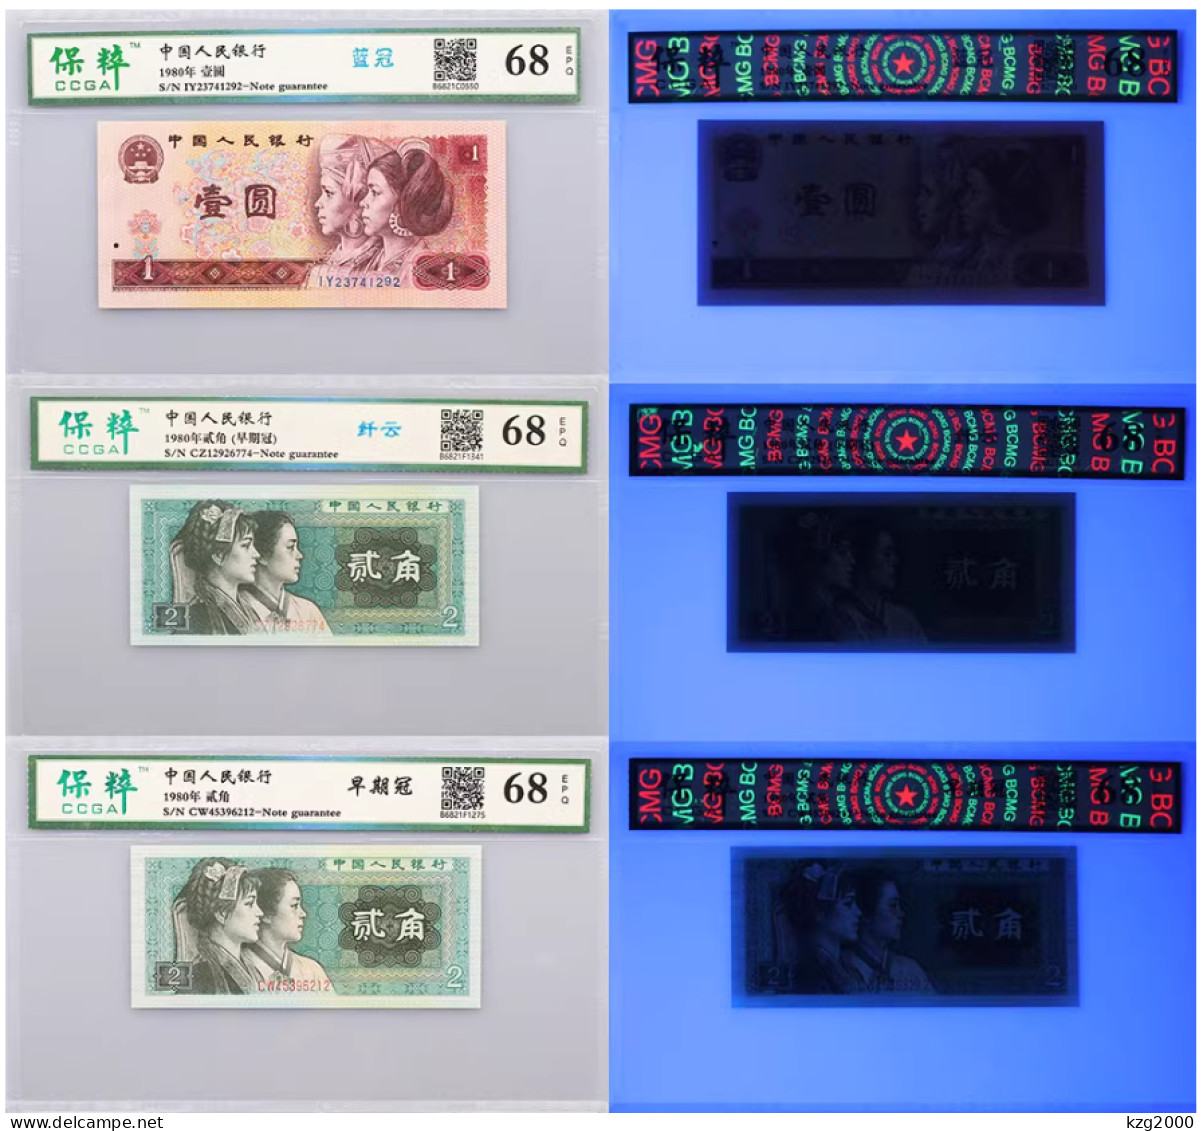 China Banknote 1980 The 4th set of RMB Paper Money Fluorescent version Full set of 27 sheets Banknotes 27Pcs